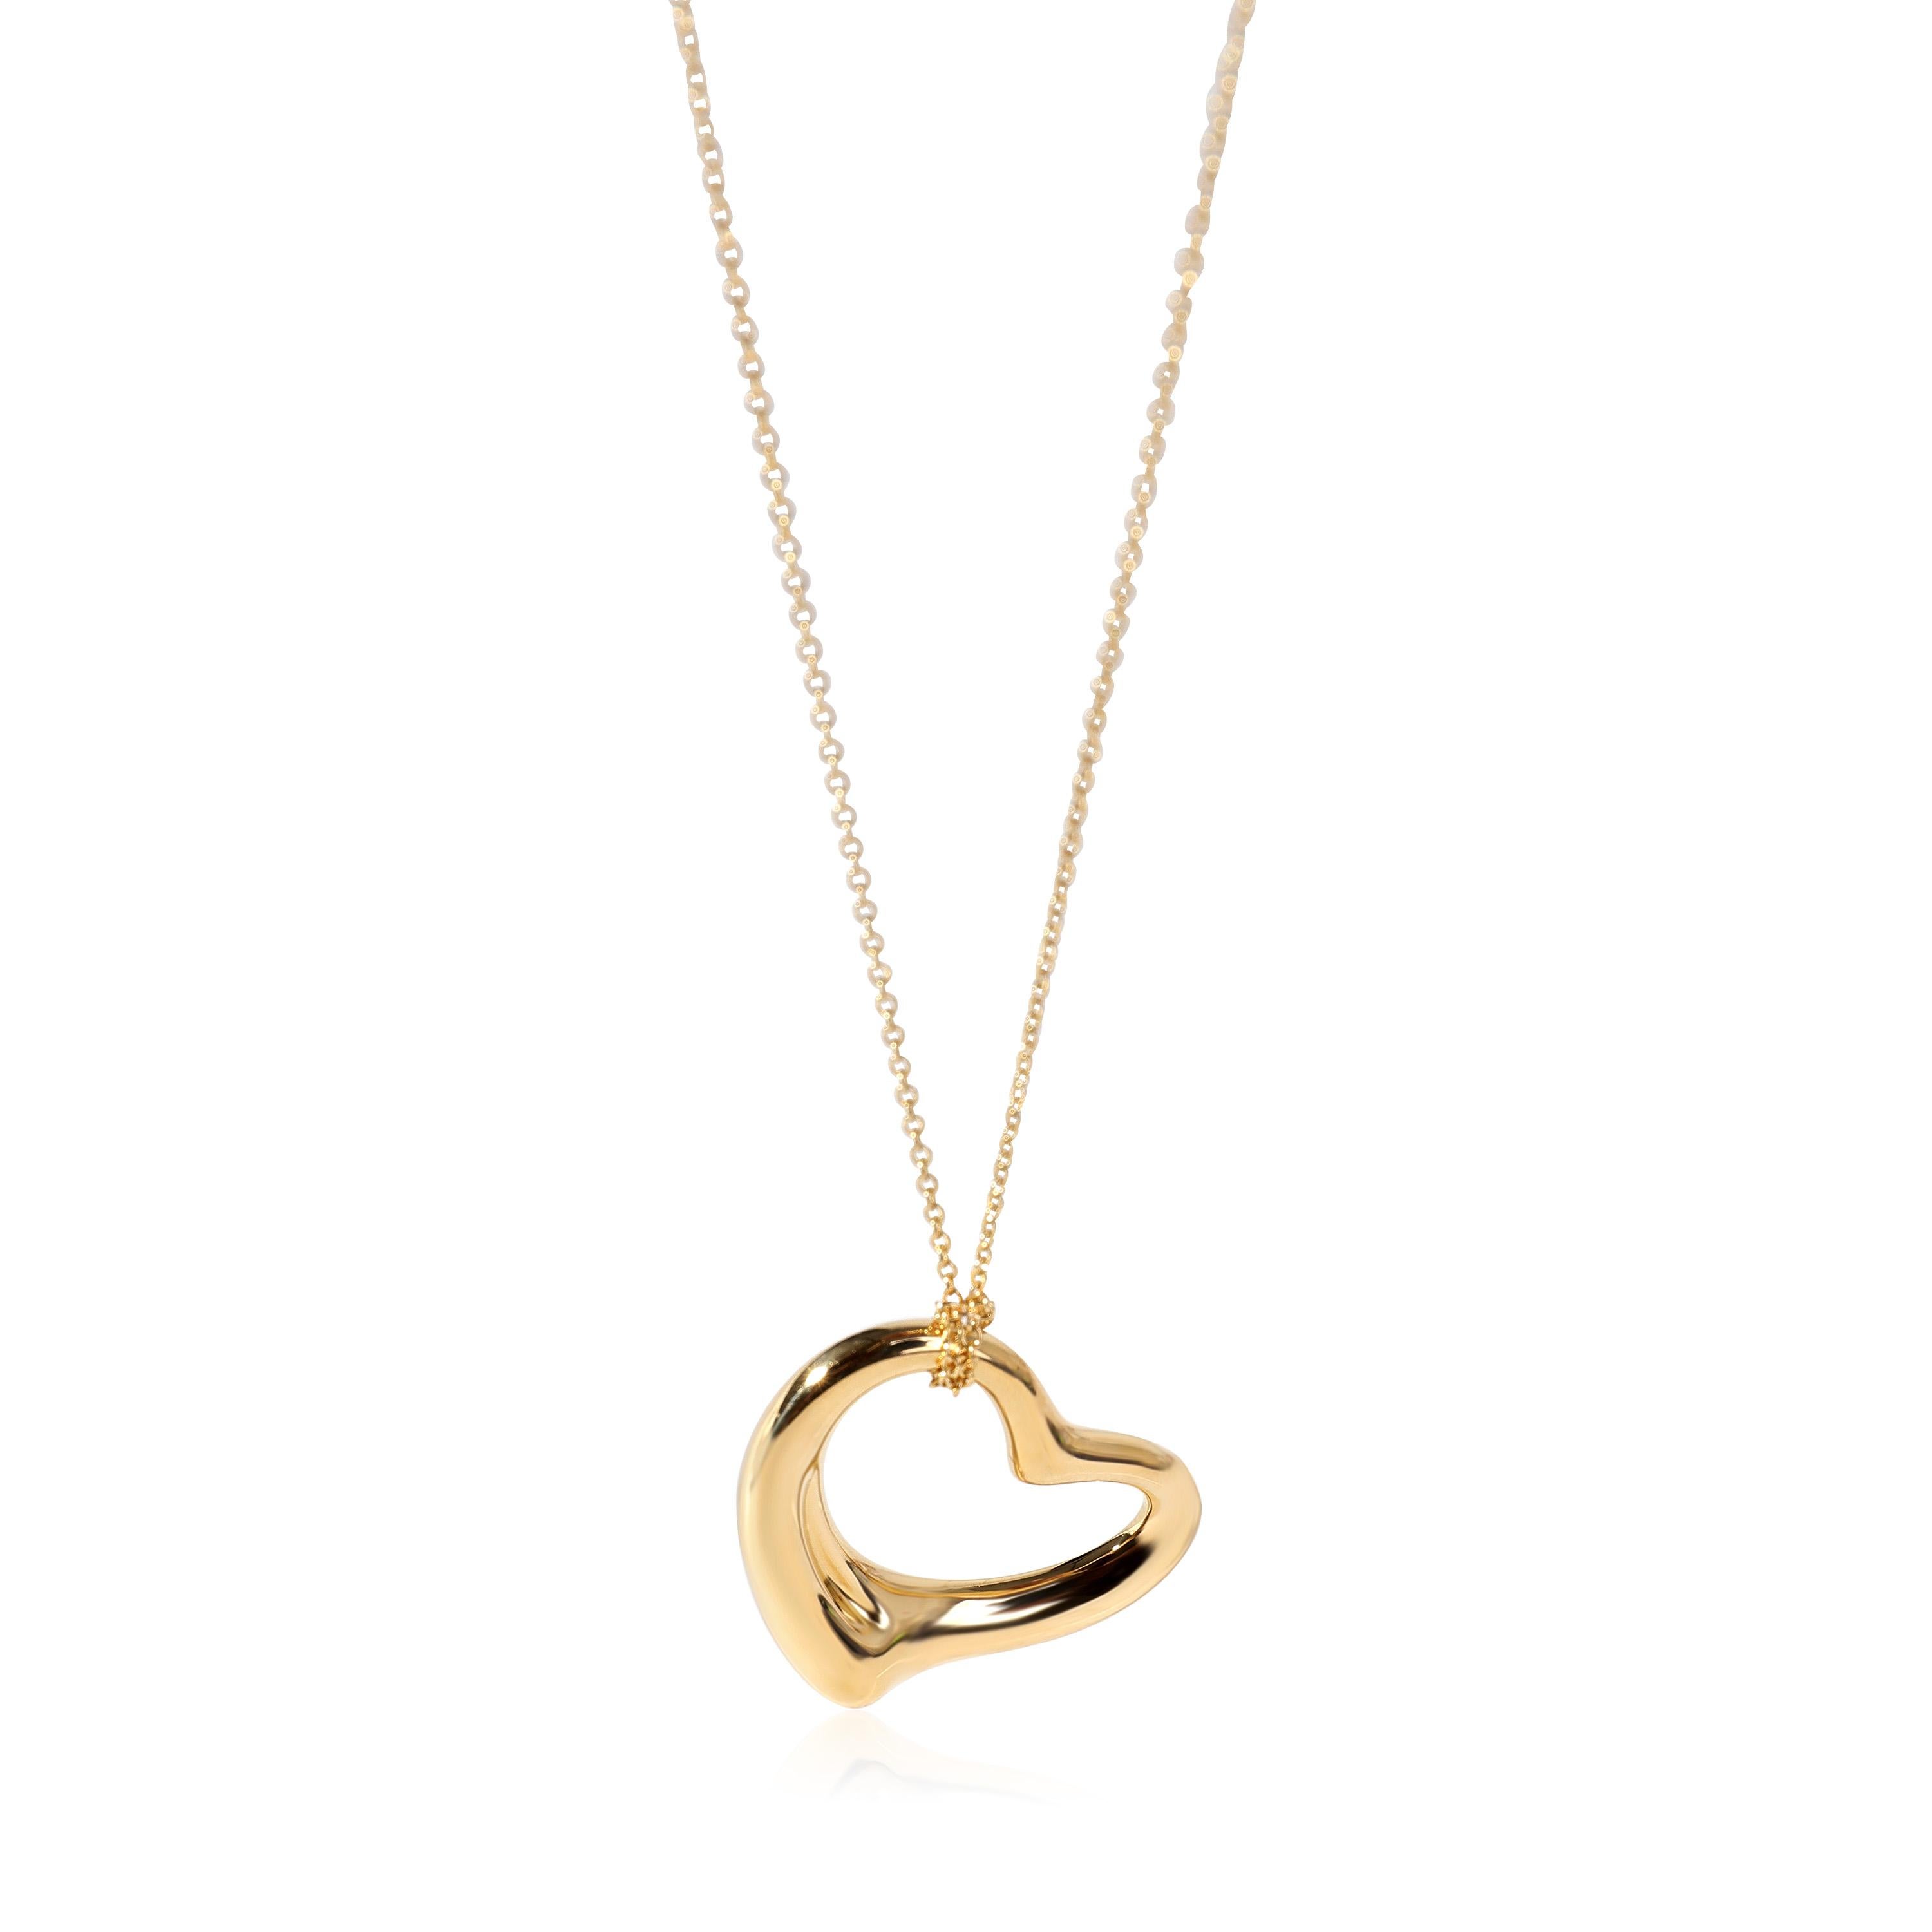 Tiffany & Co. Elsa Peretti Open Heart Pendant in 18k Yellow Gold

PRIMARY DETAILS
SKU: 120730
Listing Title: Tiffany & Co. Elsa Peretti Open Heart Pendant in 18k Yellow Gold
Condition Description: Retails for 1800 USD. In excellent condition and